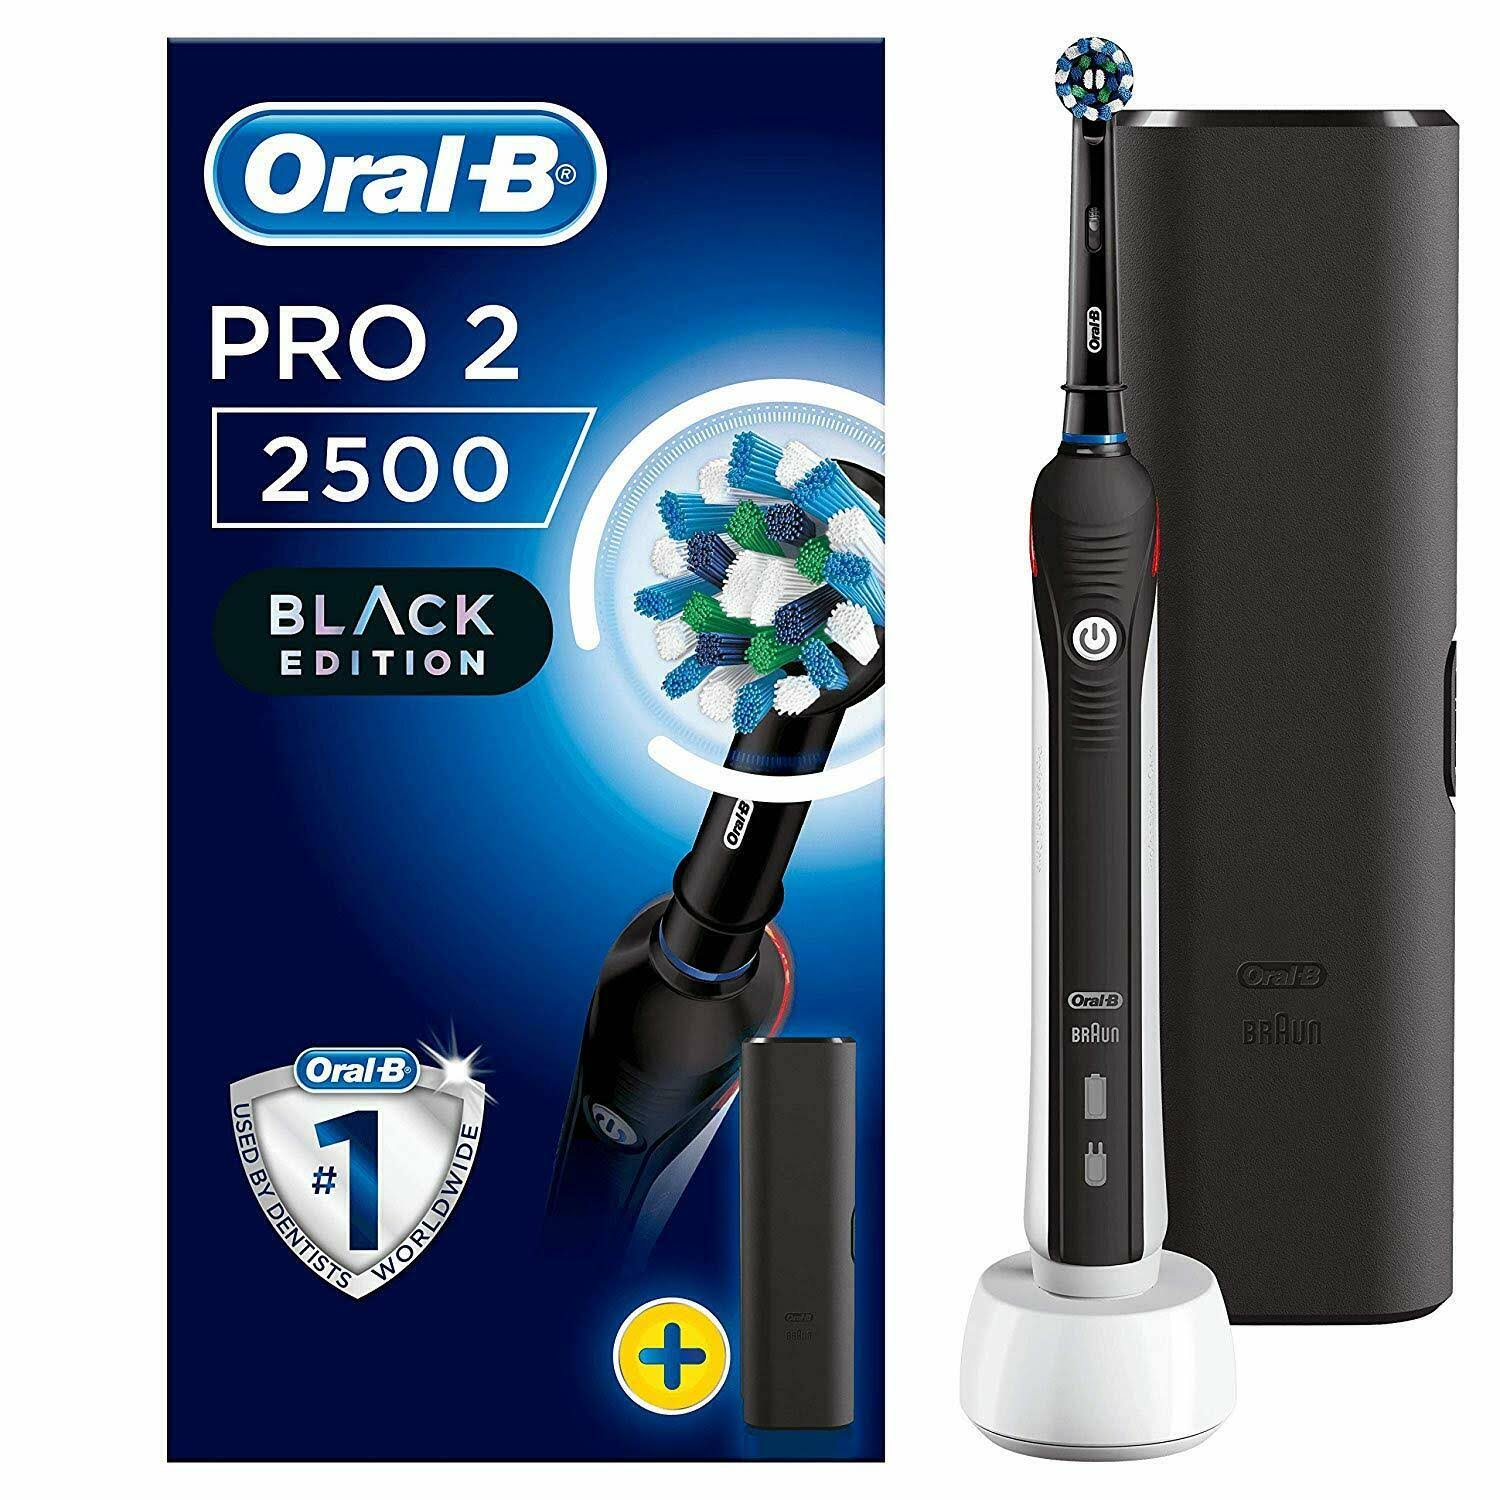 Oral-B Pro 2 2500N CrossAction Electric Toothbrush - with Travel Case, Black